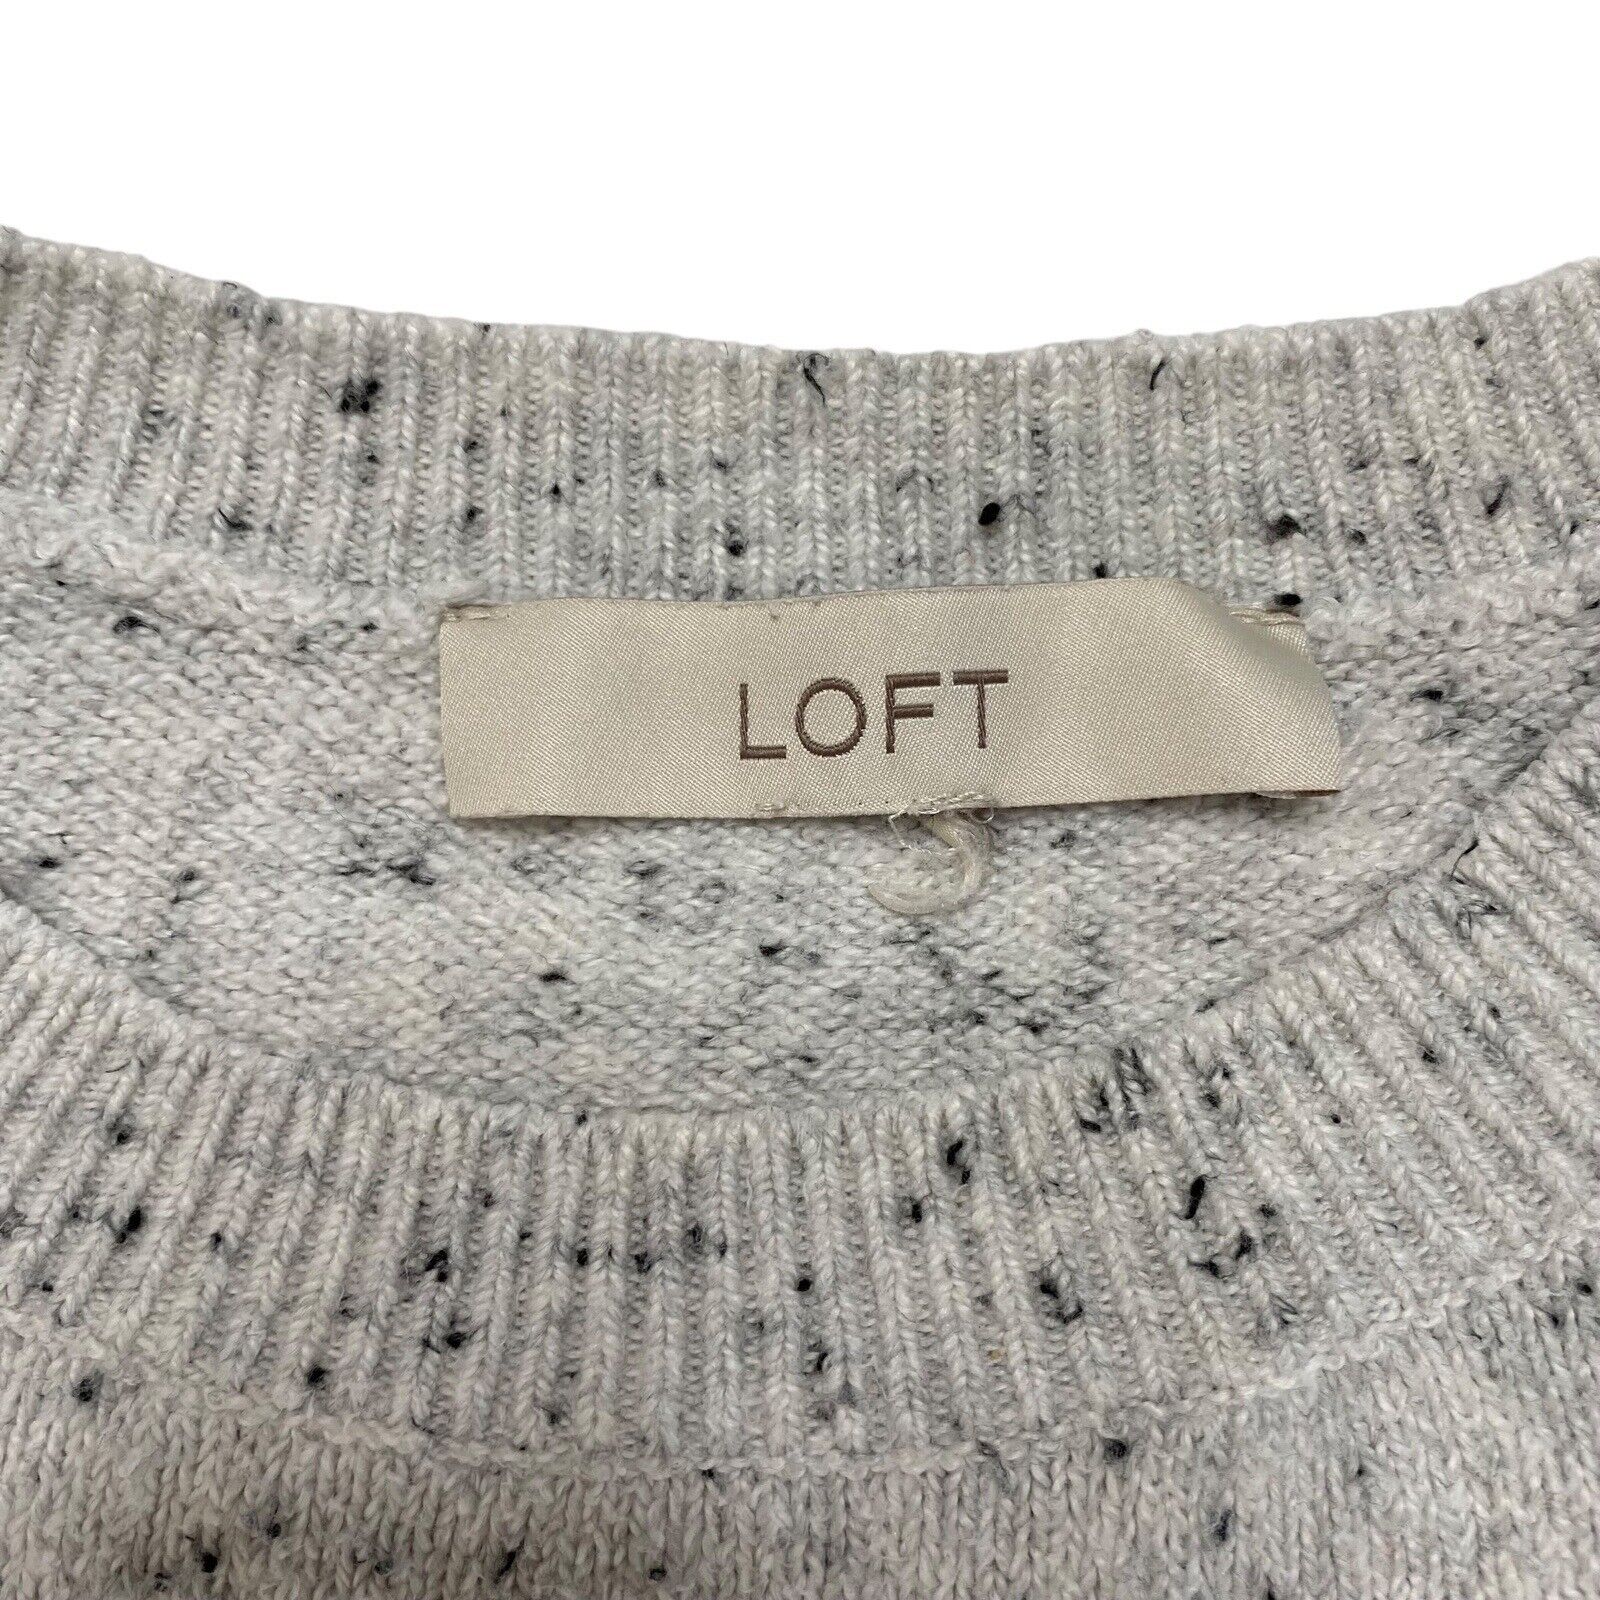 LOFT Playful Penguin Gray Speckled Crew Neck Pullover Sweater Size XS/S ...